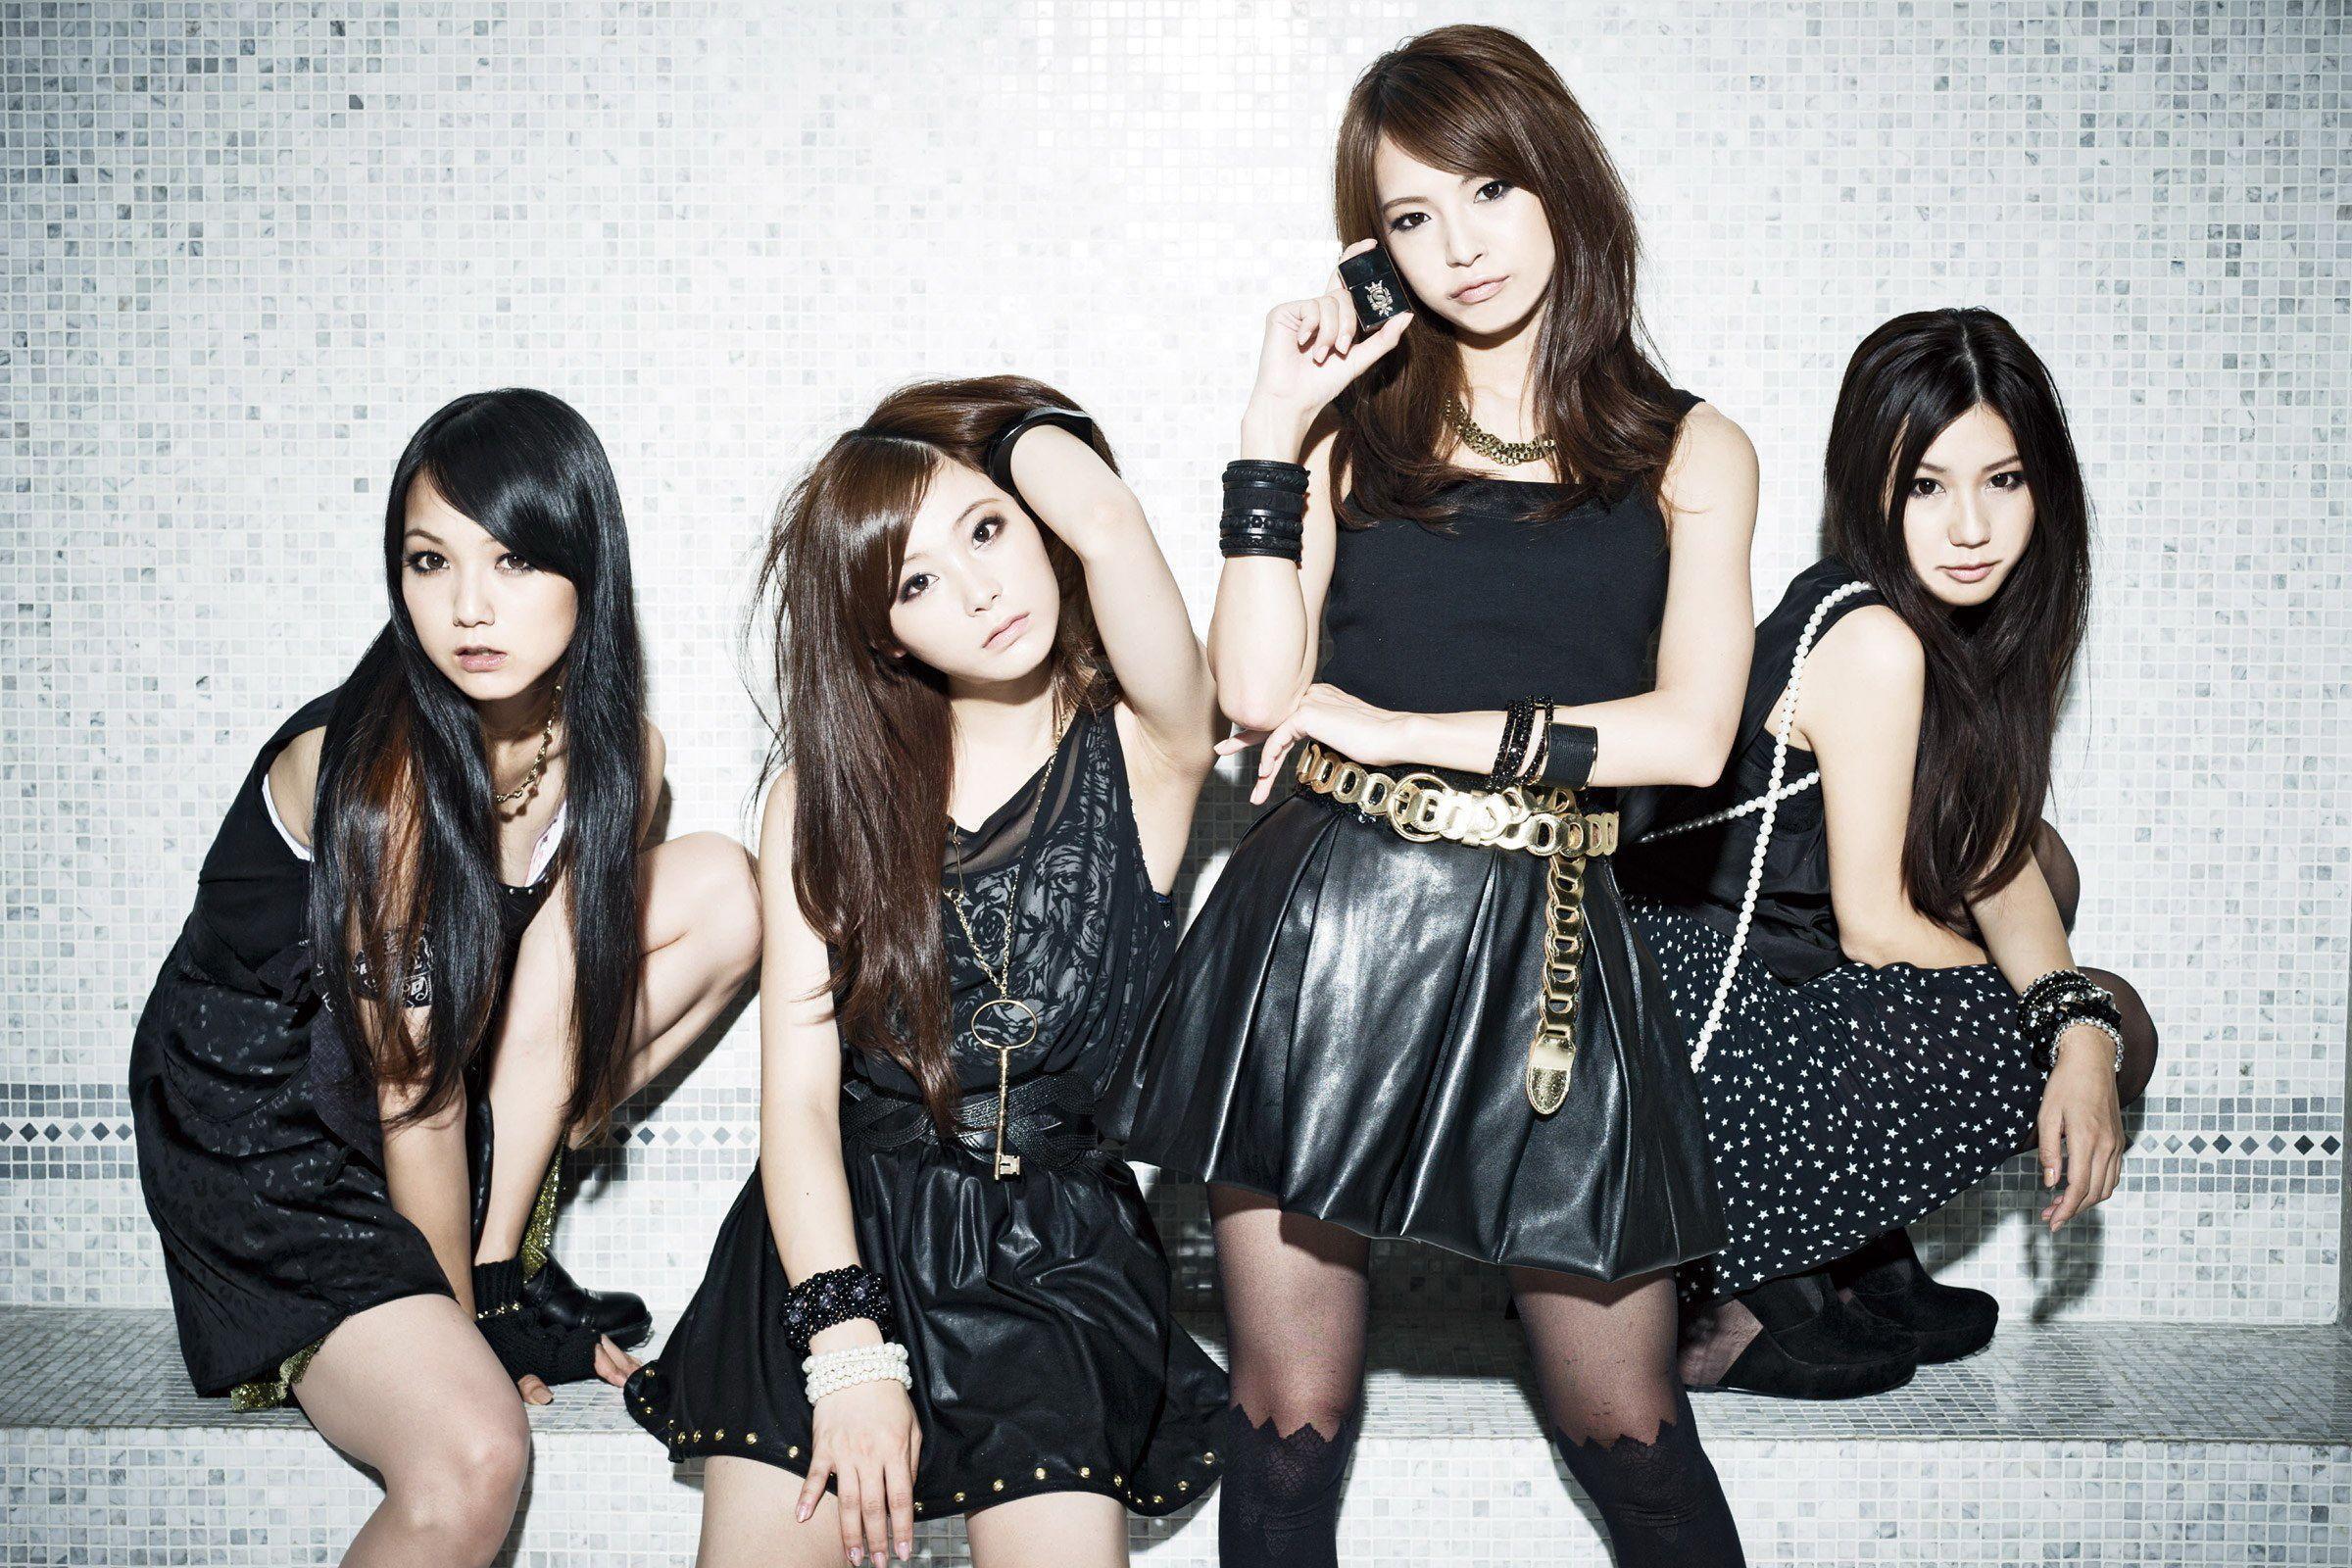 Scandal Wallpapers Wallpaper Cave